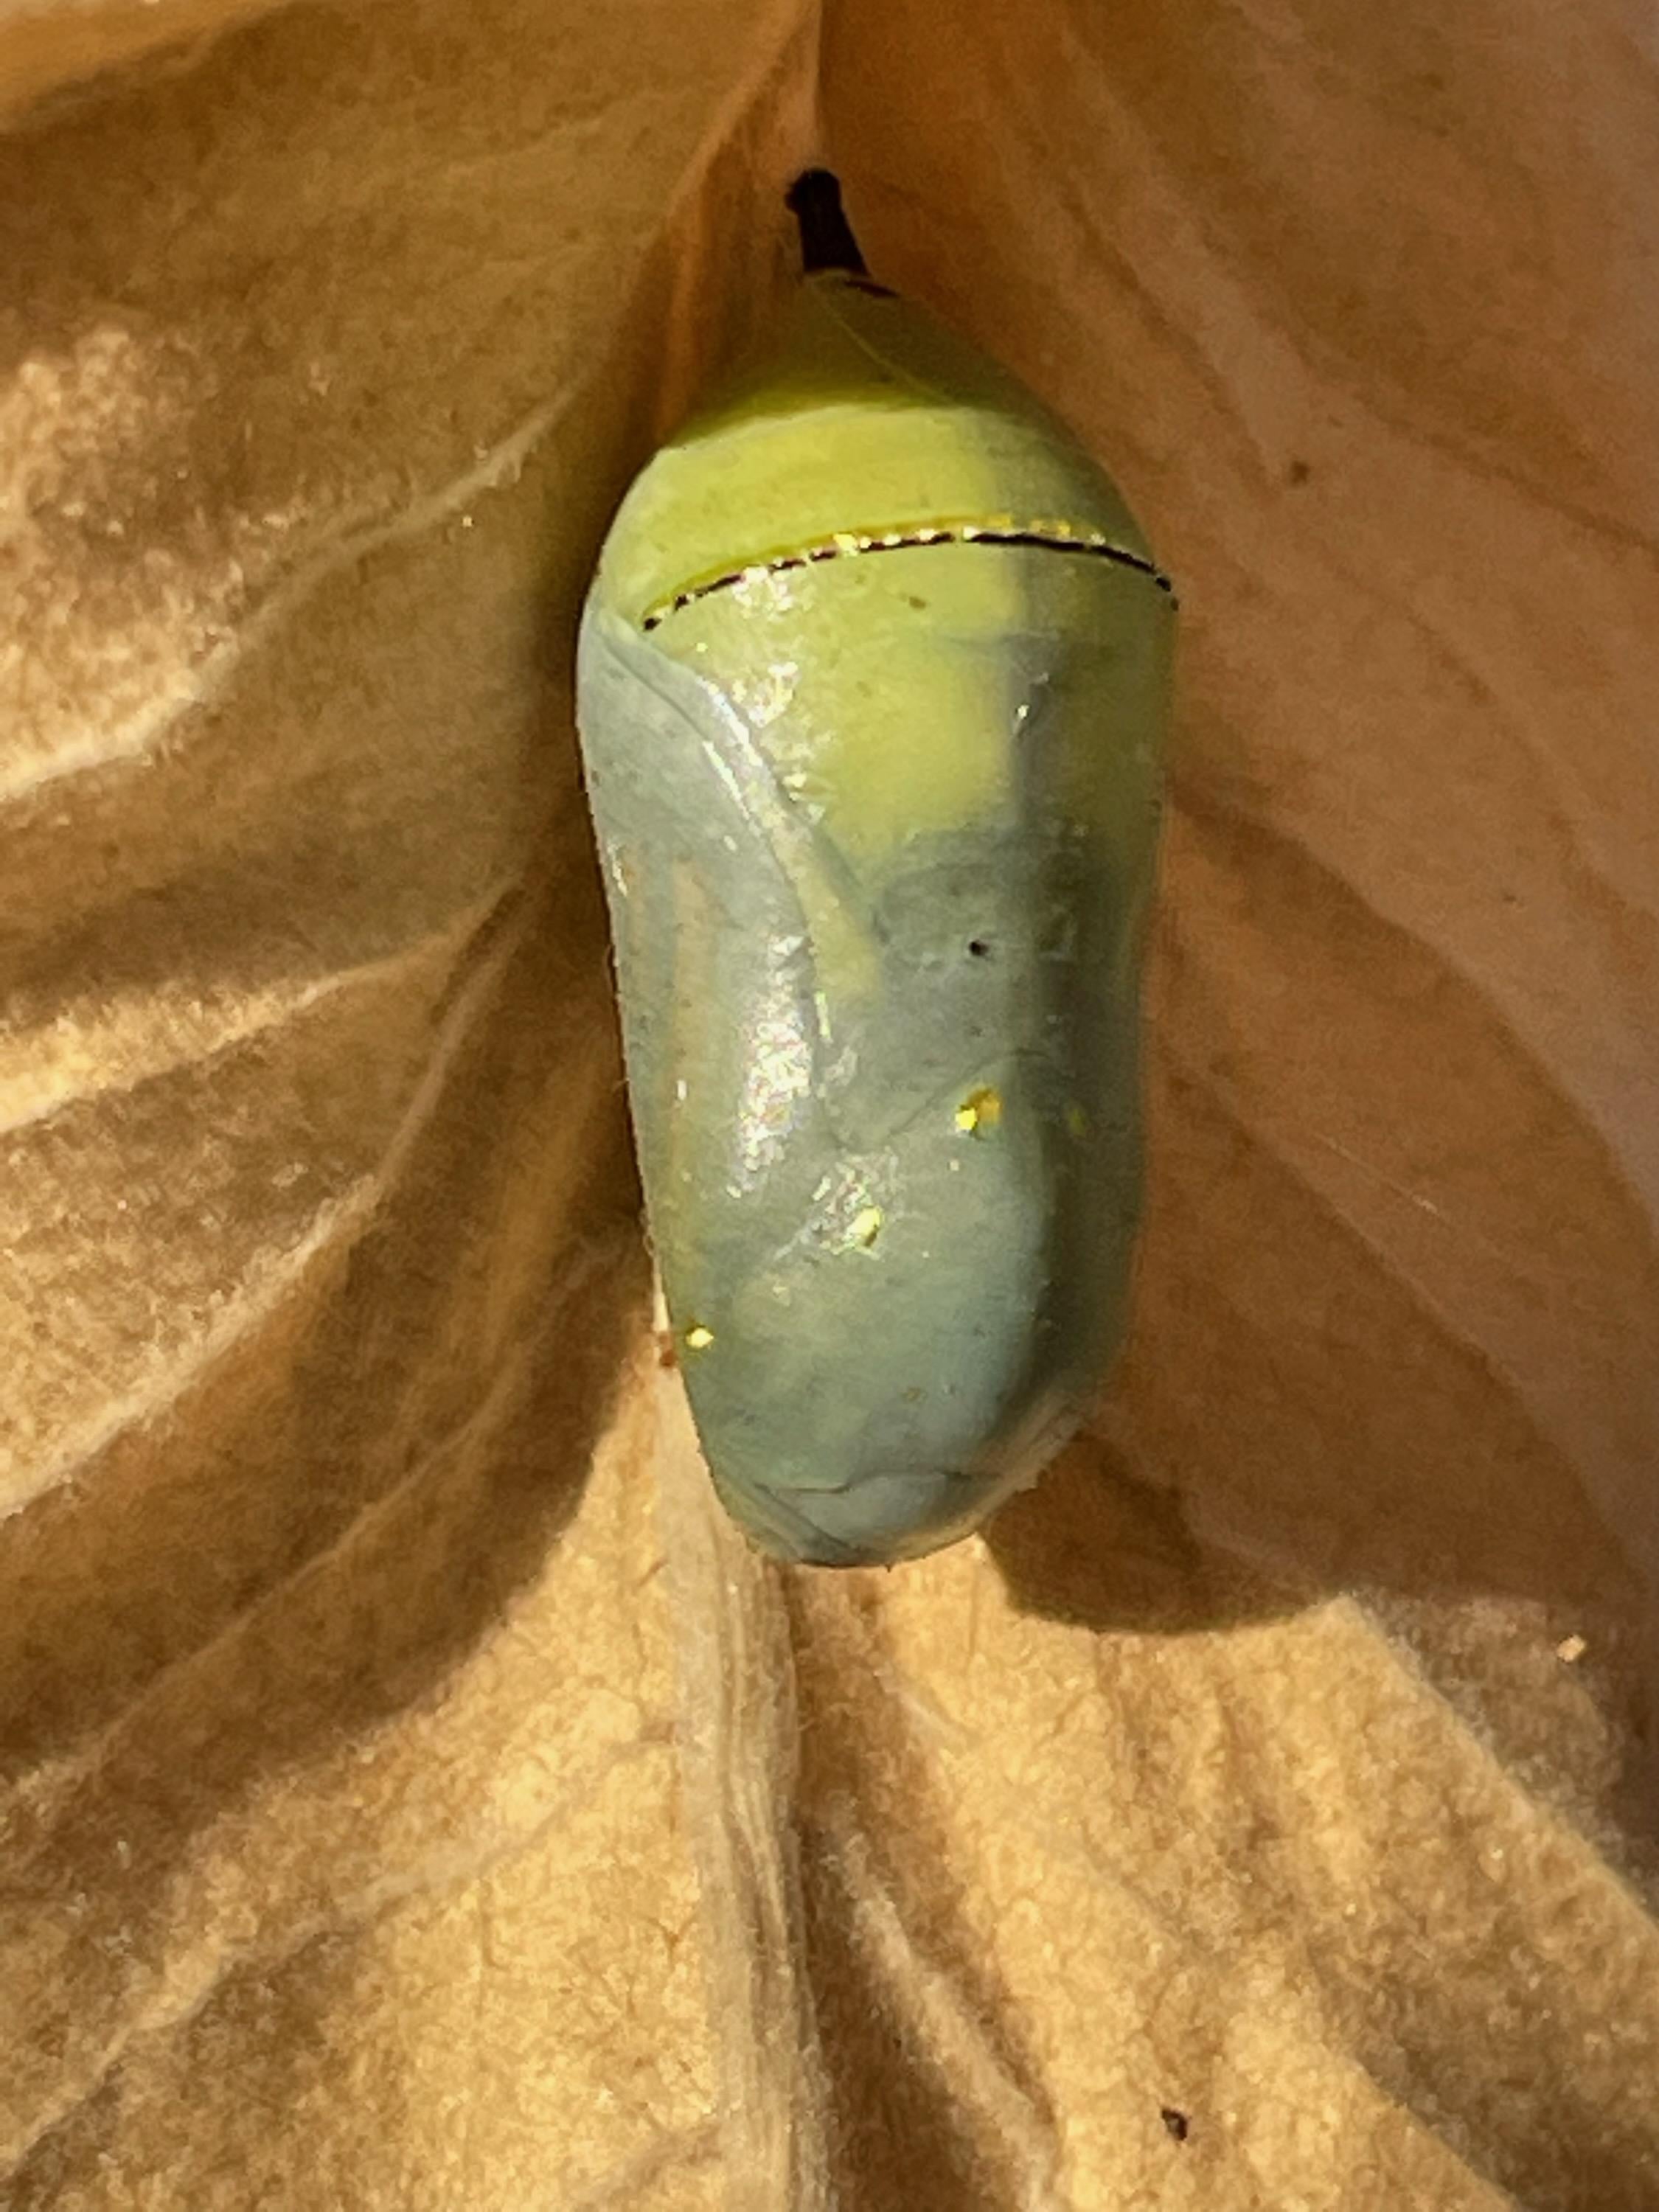 a greenish chrysalis hangs on a dry brown leaf. The bottom and edge of the chrysalis are a dark grayish color